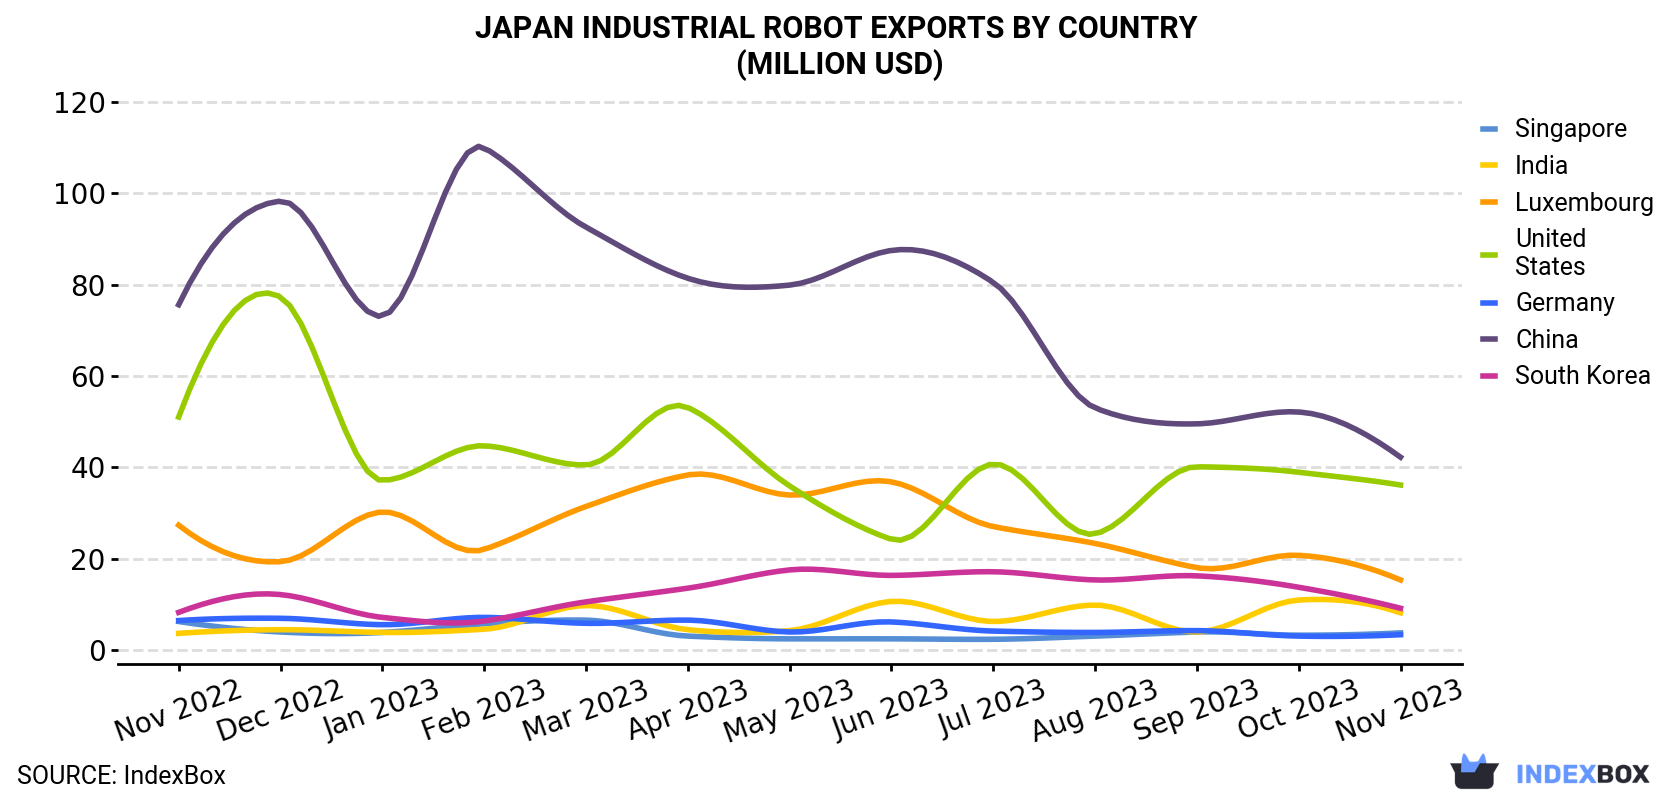 Japan Industrial Robot Exports By Country (Million USD)